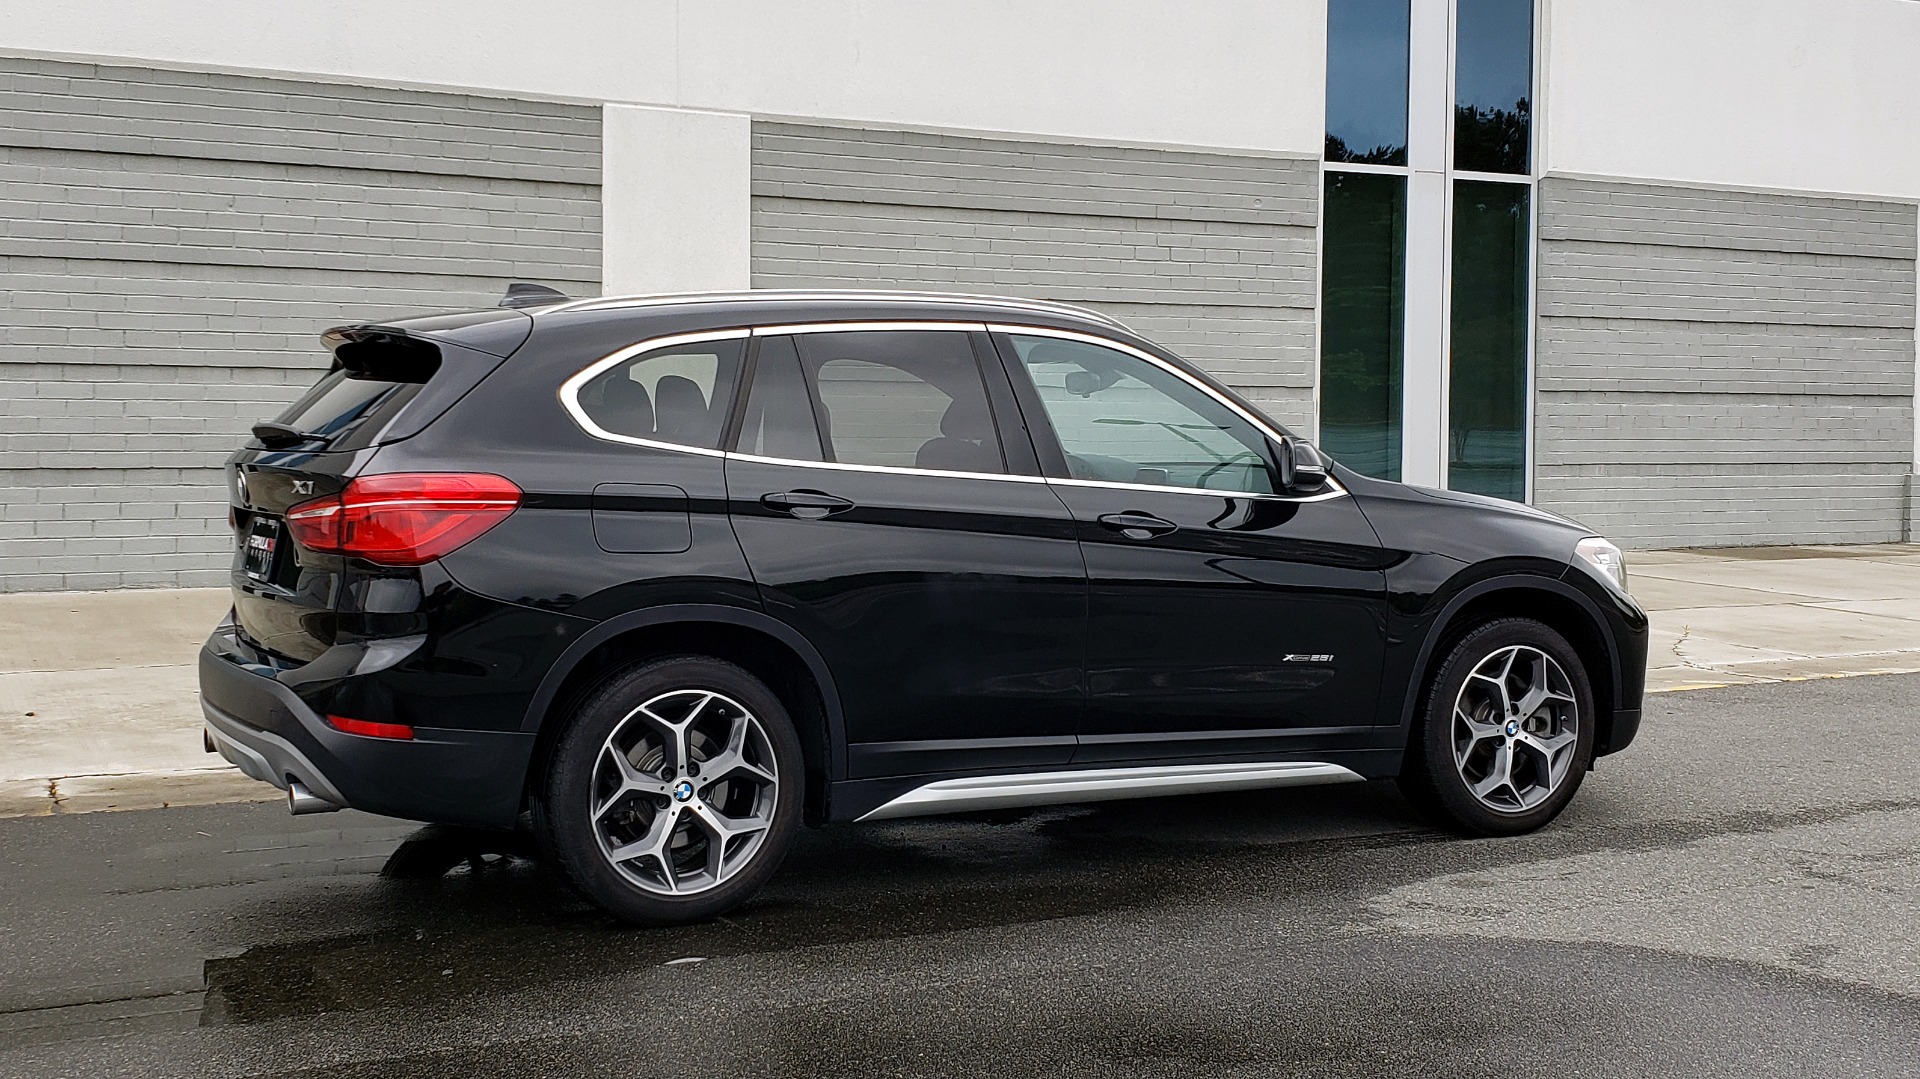 Used 2018 BMW X1 XDRIVE28I / CONV PKG / NAV / HTD STS / PANO-ROOF / 18IN WHLS / REARVIEW for sale Sold at Formula Imports in Charlotte NC 28227 8